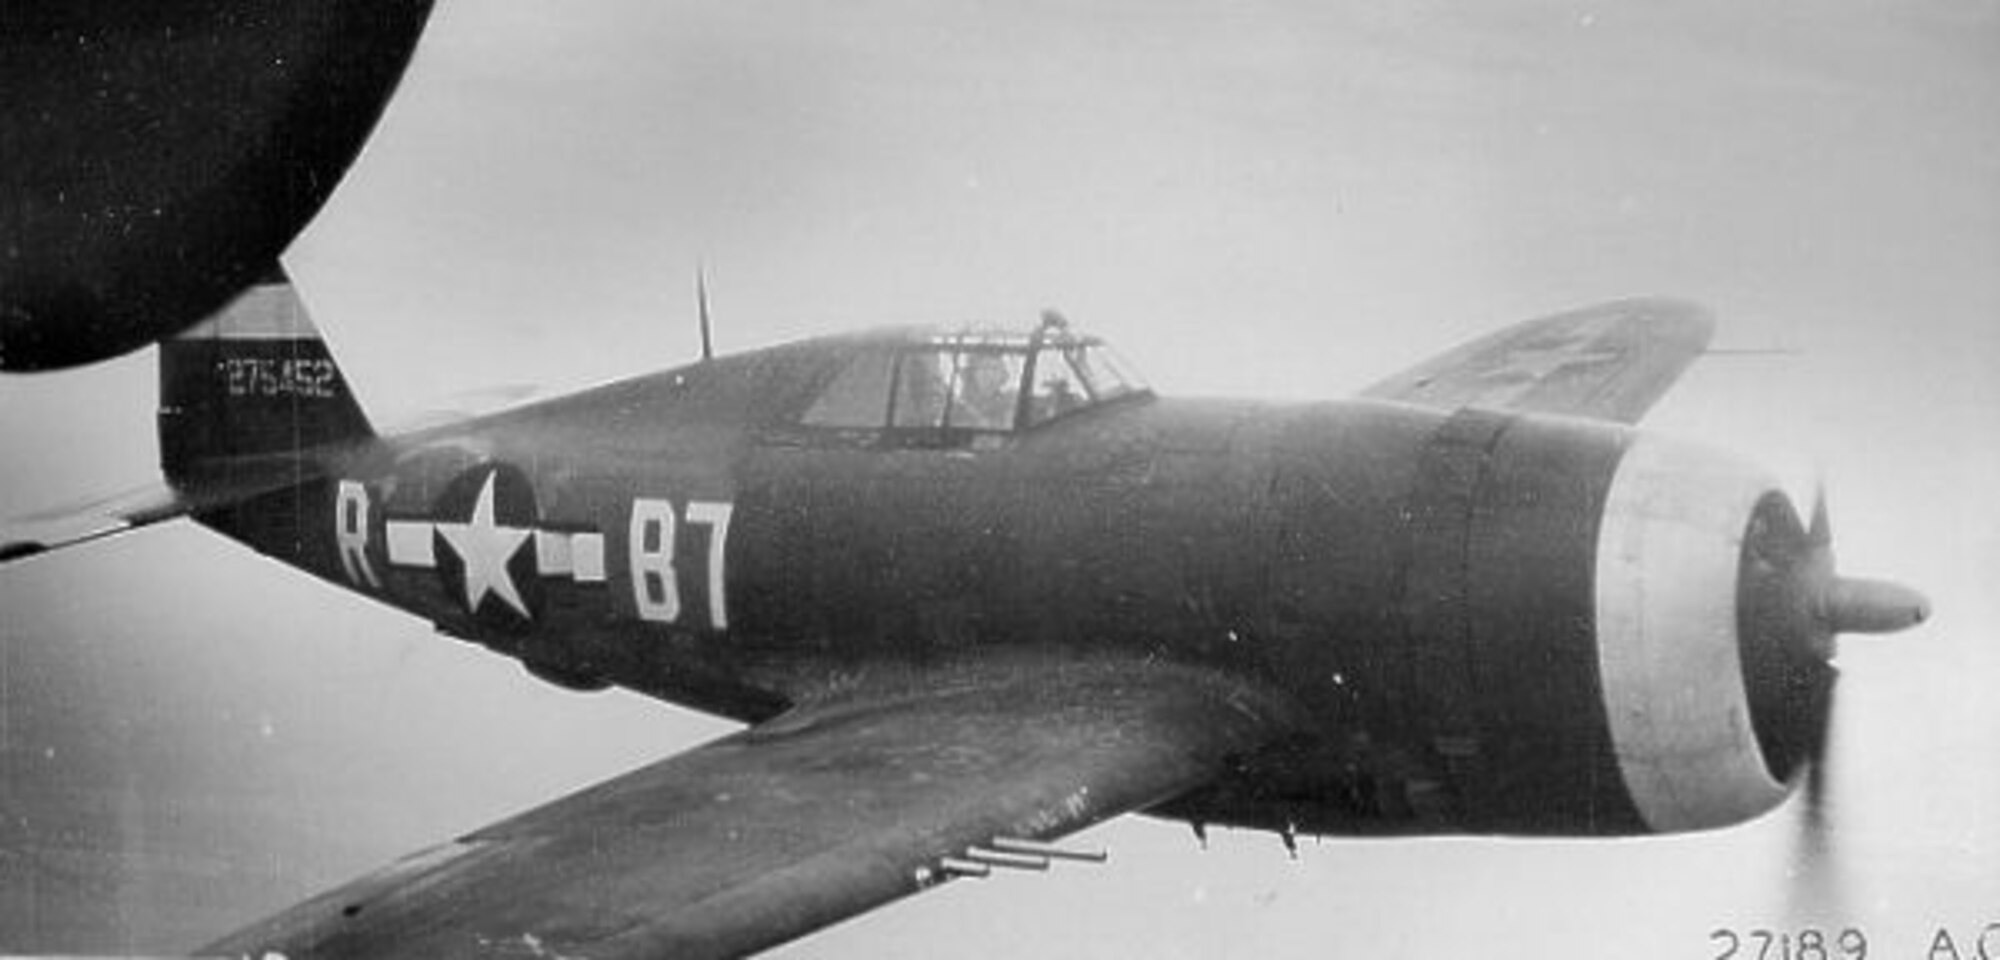 140422-Z-ZZ999-001 -- A P-47 Thunderbolt flown by 1st Lt. Vernon R. Richards is seen in this undated photo from World War II. This aircraft was operated by the 374th Fighter Squadron, 361st Fighter Group, 8th Air Force, at Bottisham Airfield, England, at the time of this photo. The 374th is the direct predecessor of the 171st Air Refueling Squadron, which is now assigned to Selfridge Air National Guard Base, Mich., as part of the Michigan Air National Guard. (Air Force photo)